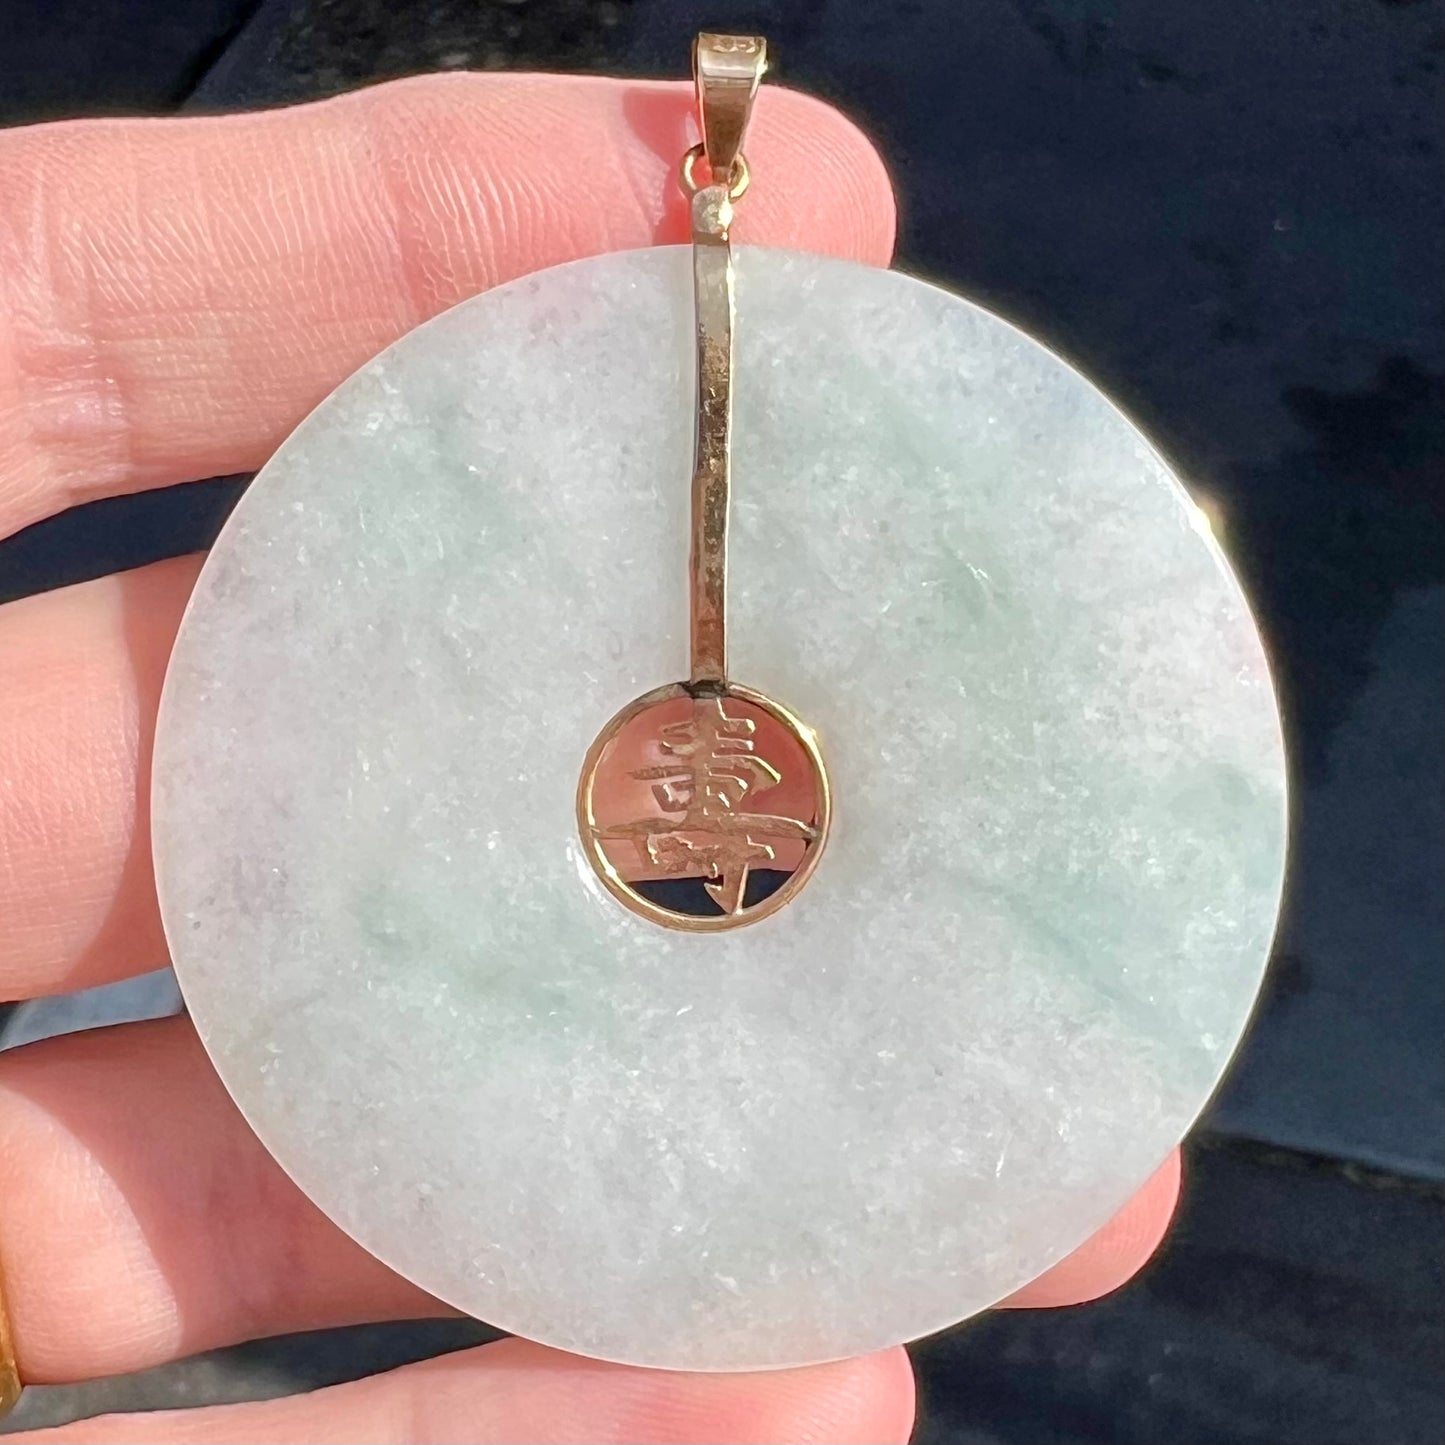 A light green jadeite jade bi pendant with a yellow gold bail and Chinese character symbol for "long life."